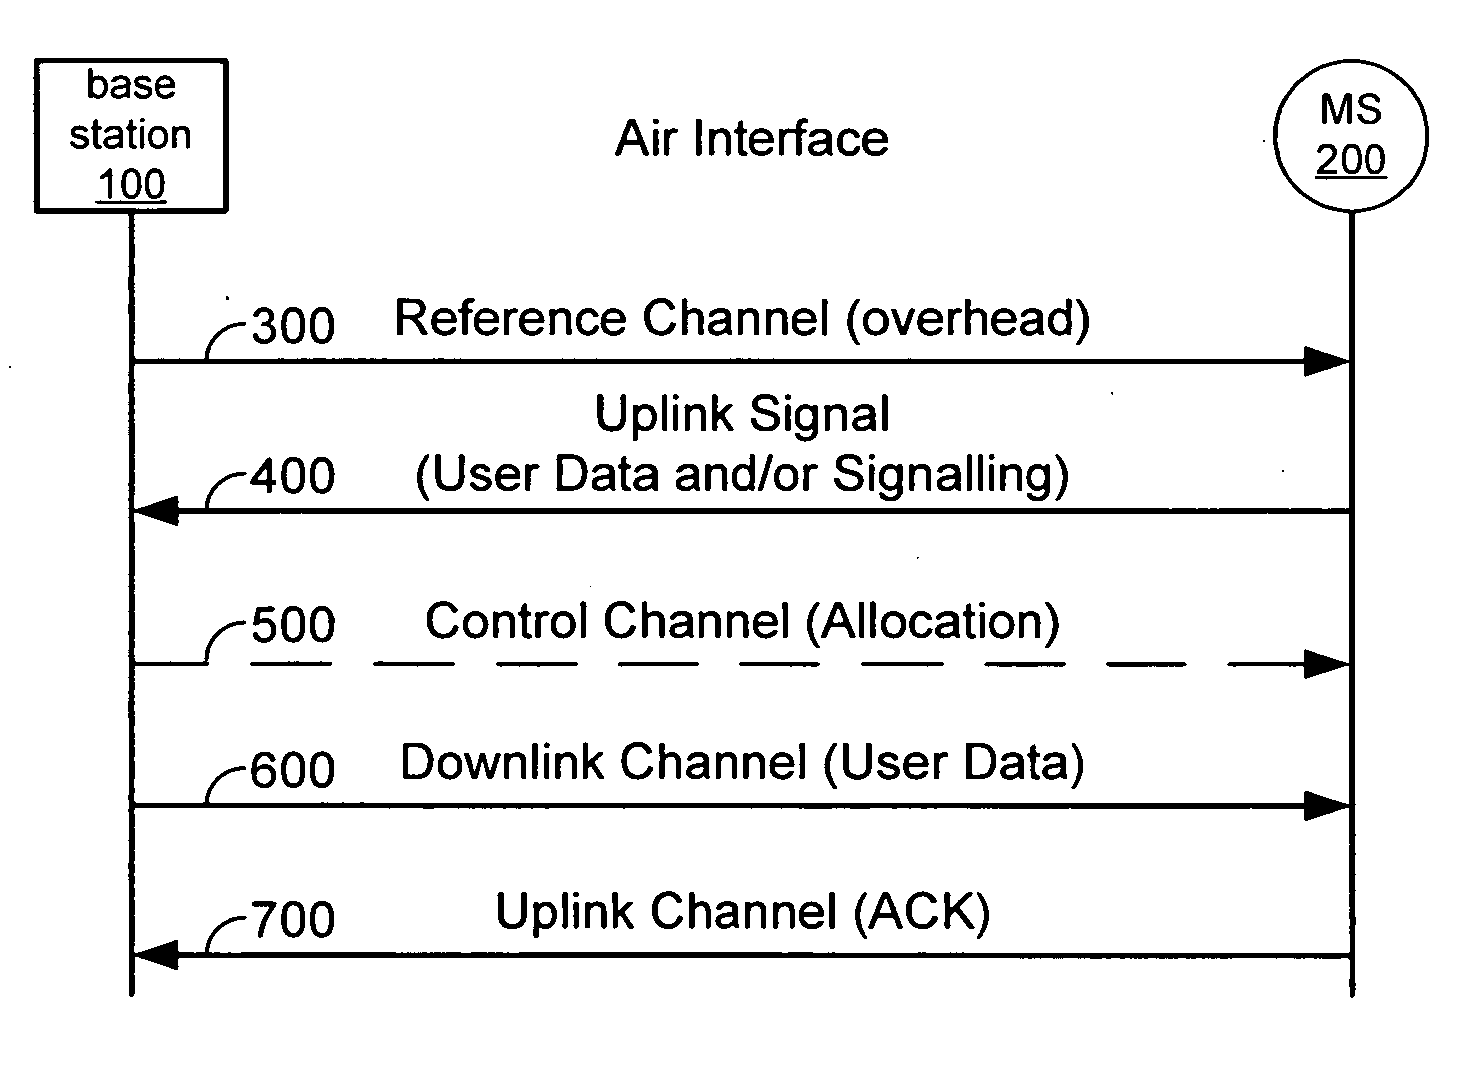 Radio link quality determination in a wireless network